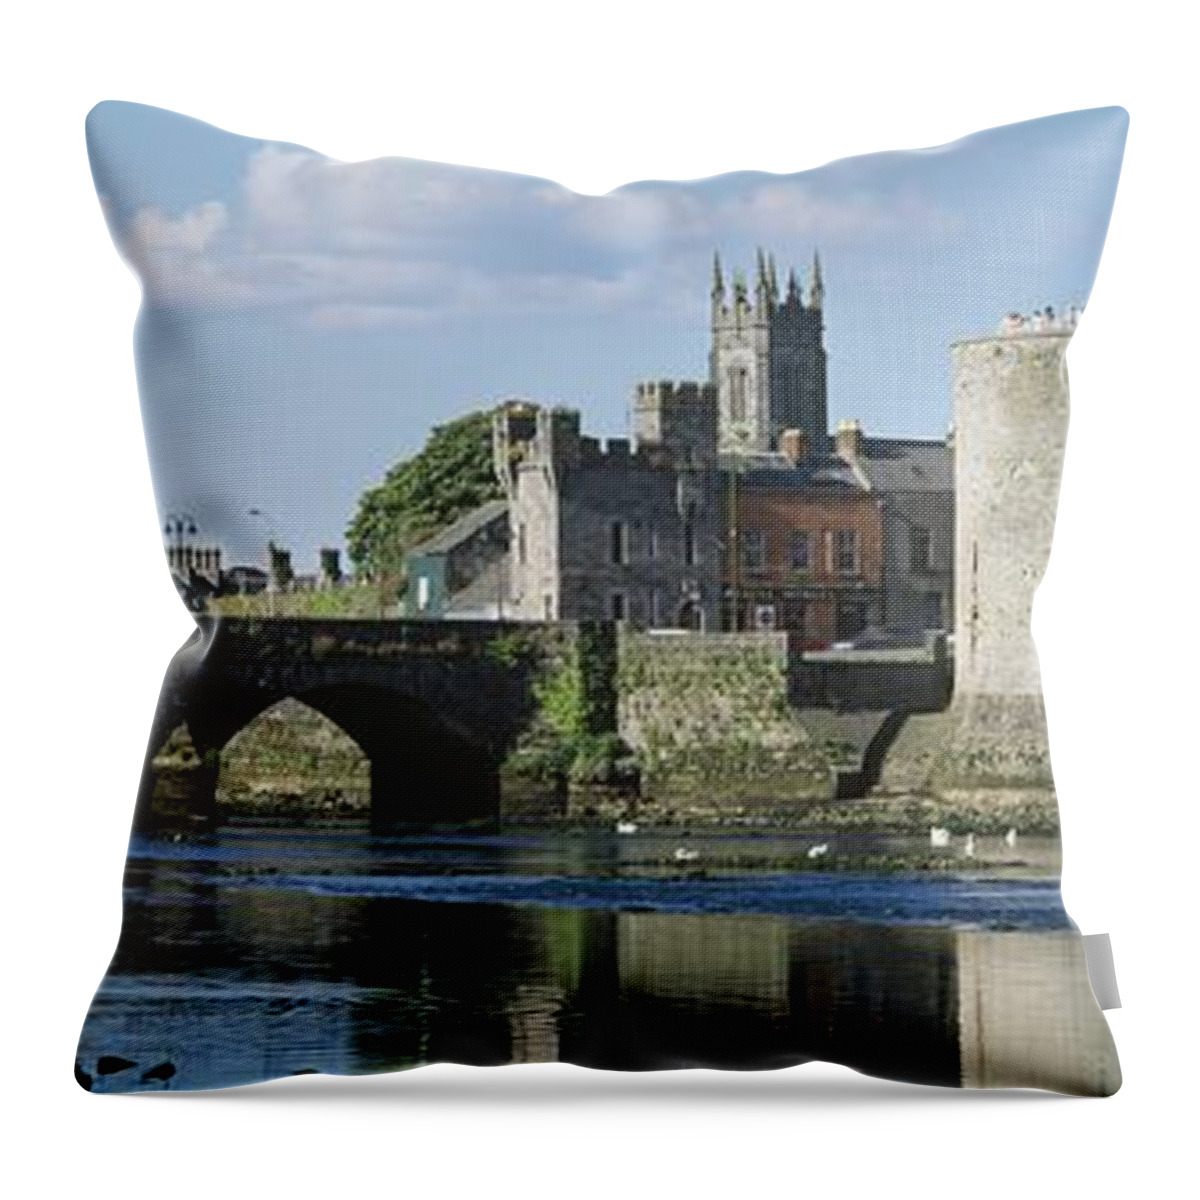 Attraction Throw Pillow featuring the photograph Castles, St Johns Castle, Co Limerick by The Irish Image Collection 